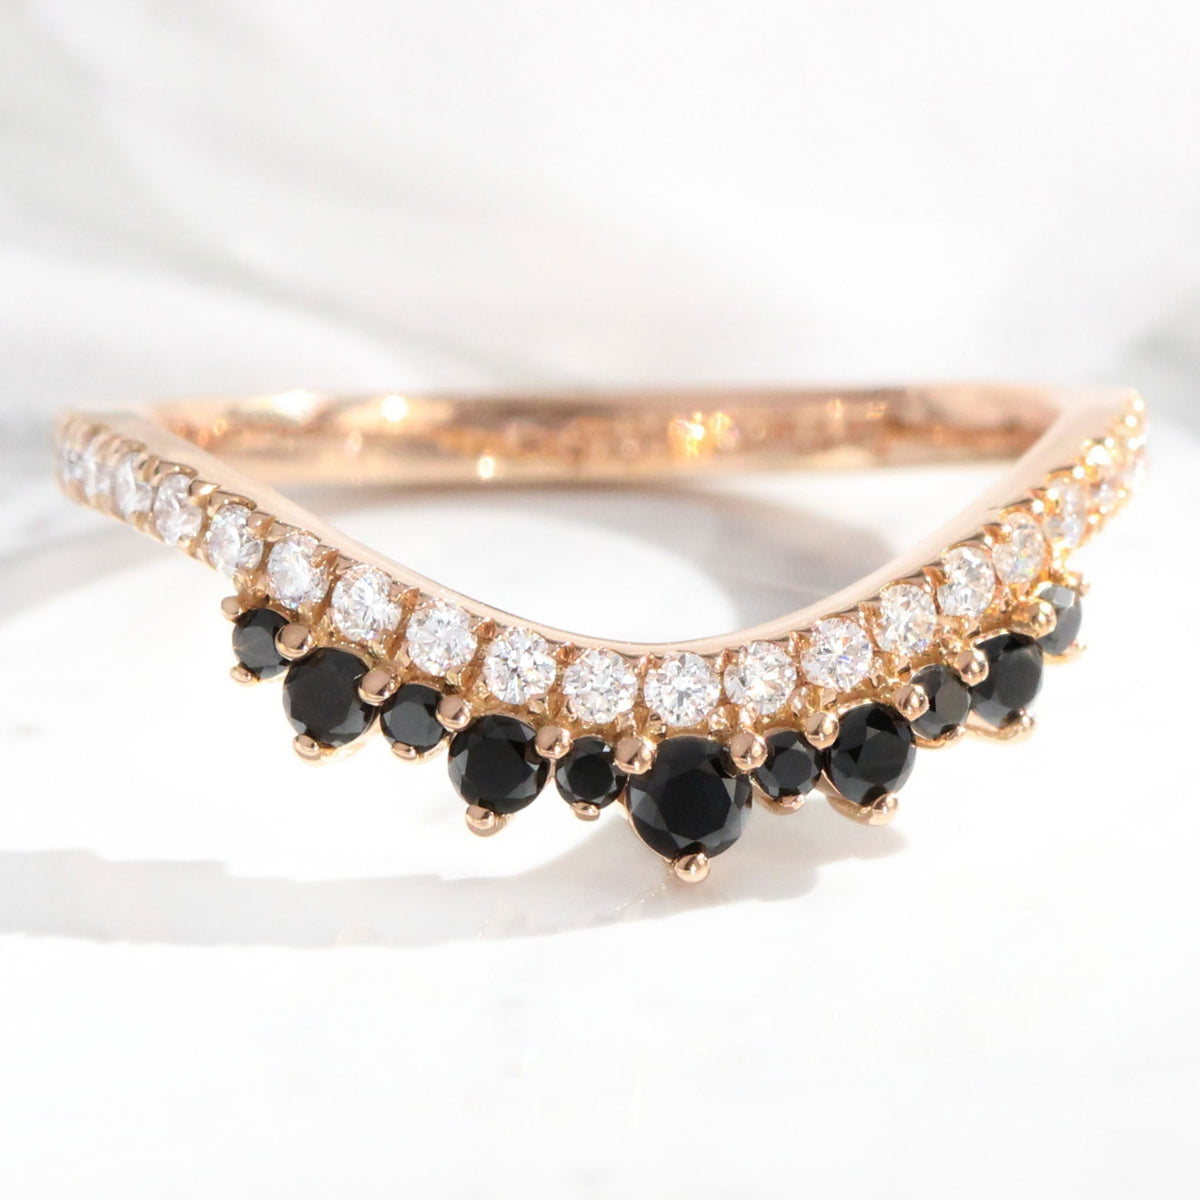 White and black diamond wedding ring rose gold curved crown diamond band la more design jewelry